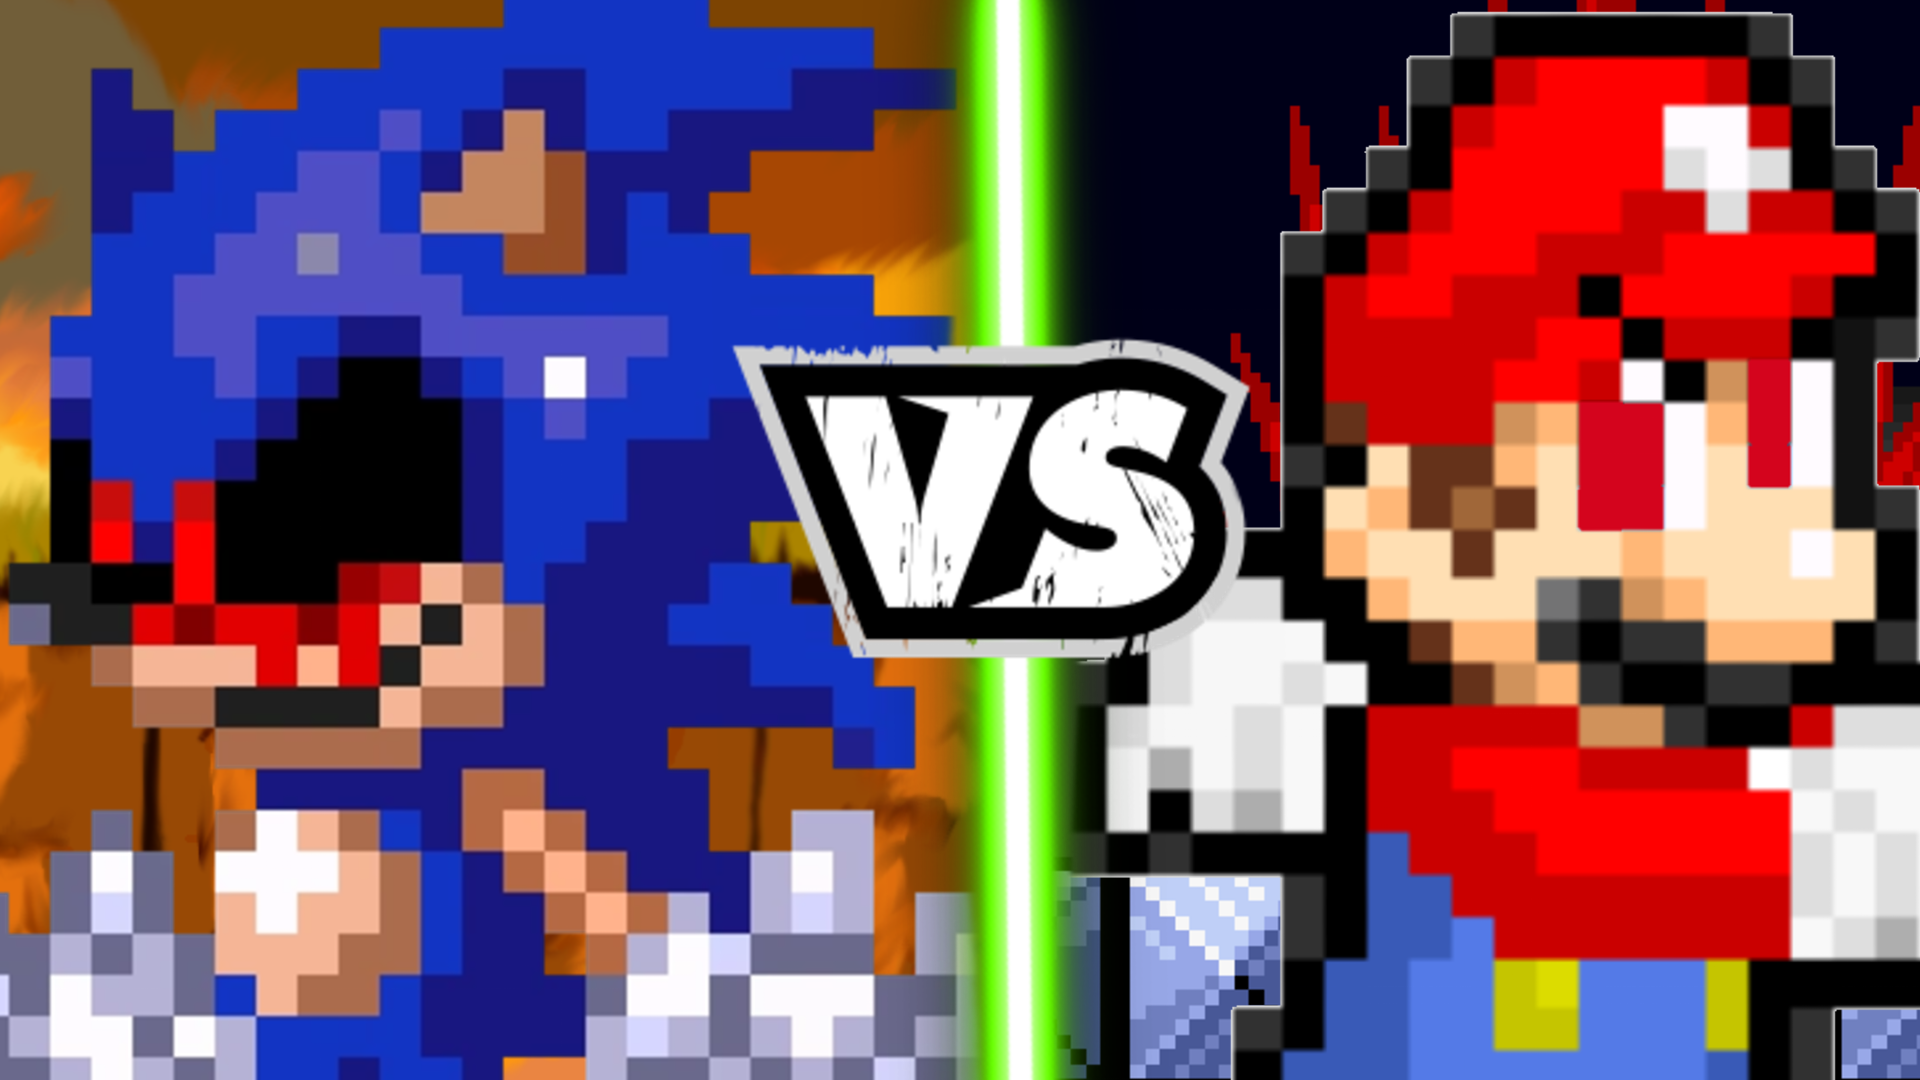 sonic and mario vs sonic exe and mario exe